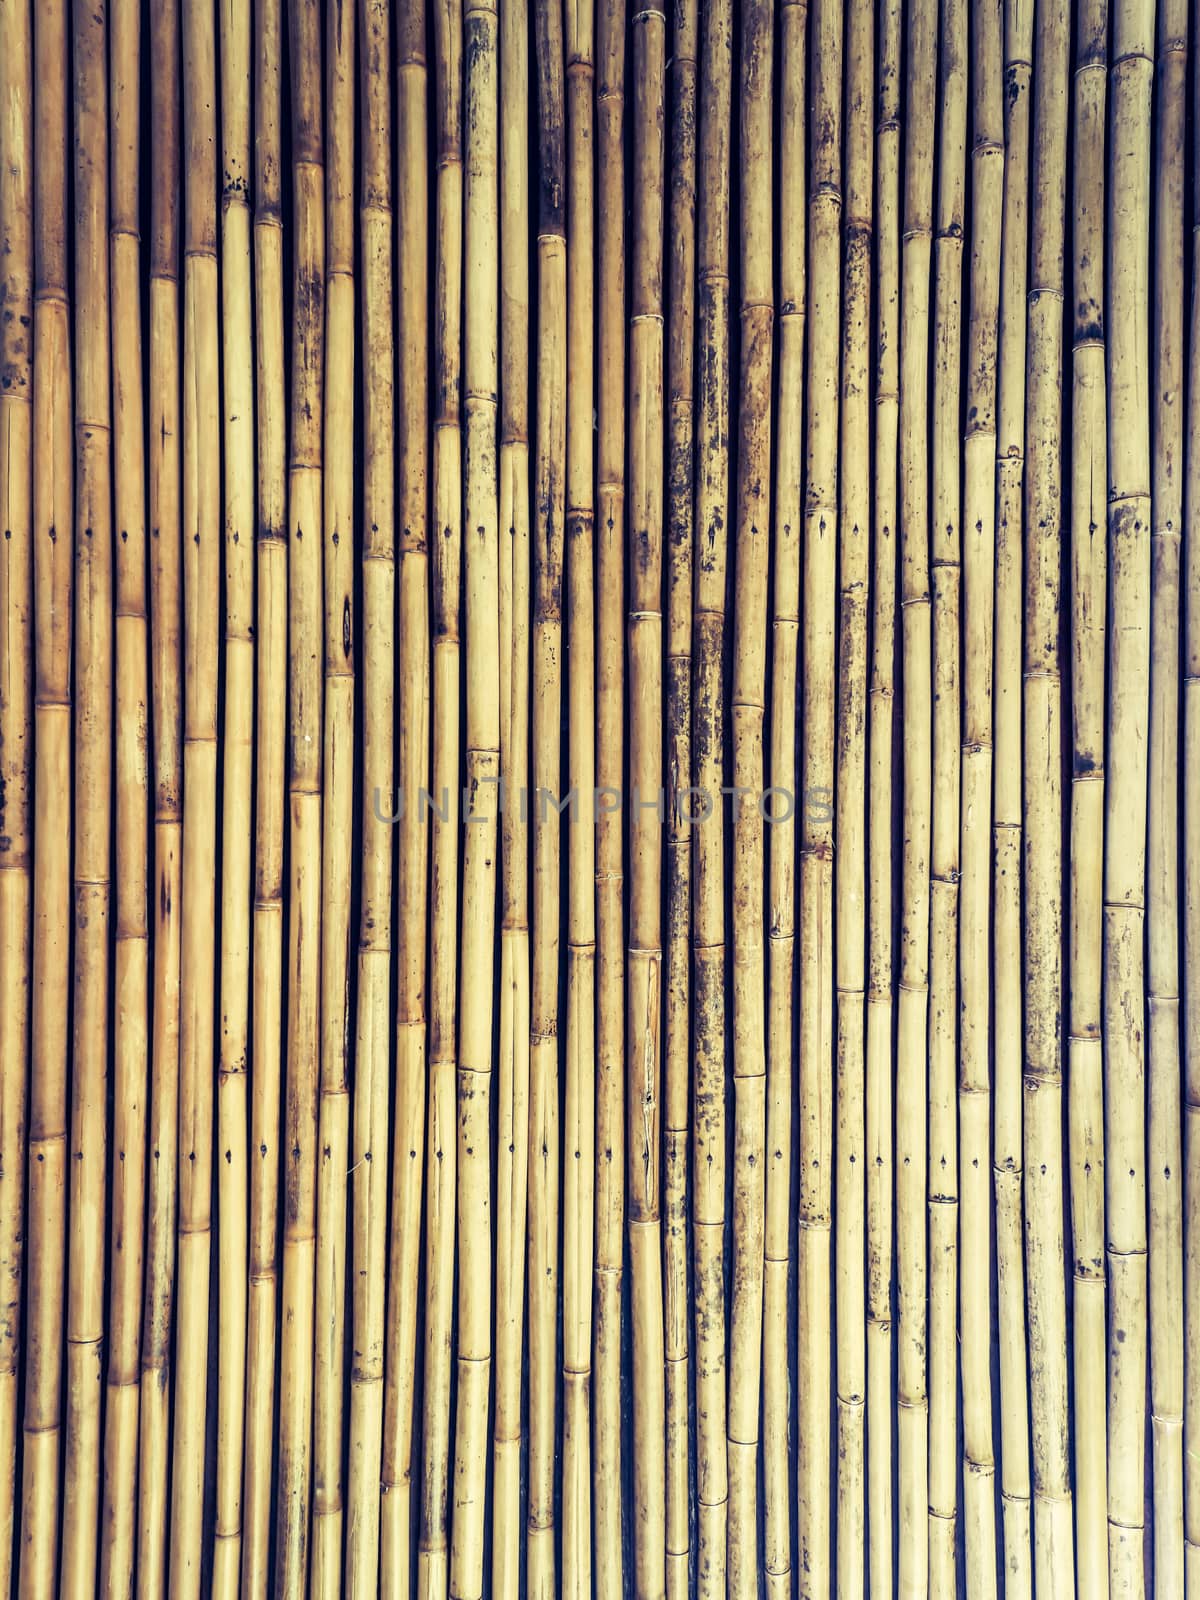 The old bamboo walls background. by ronnarong